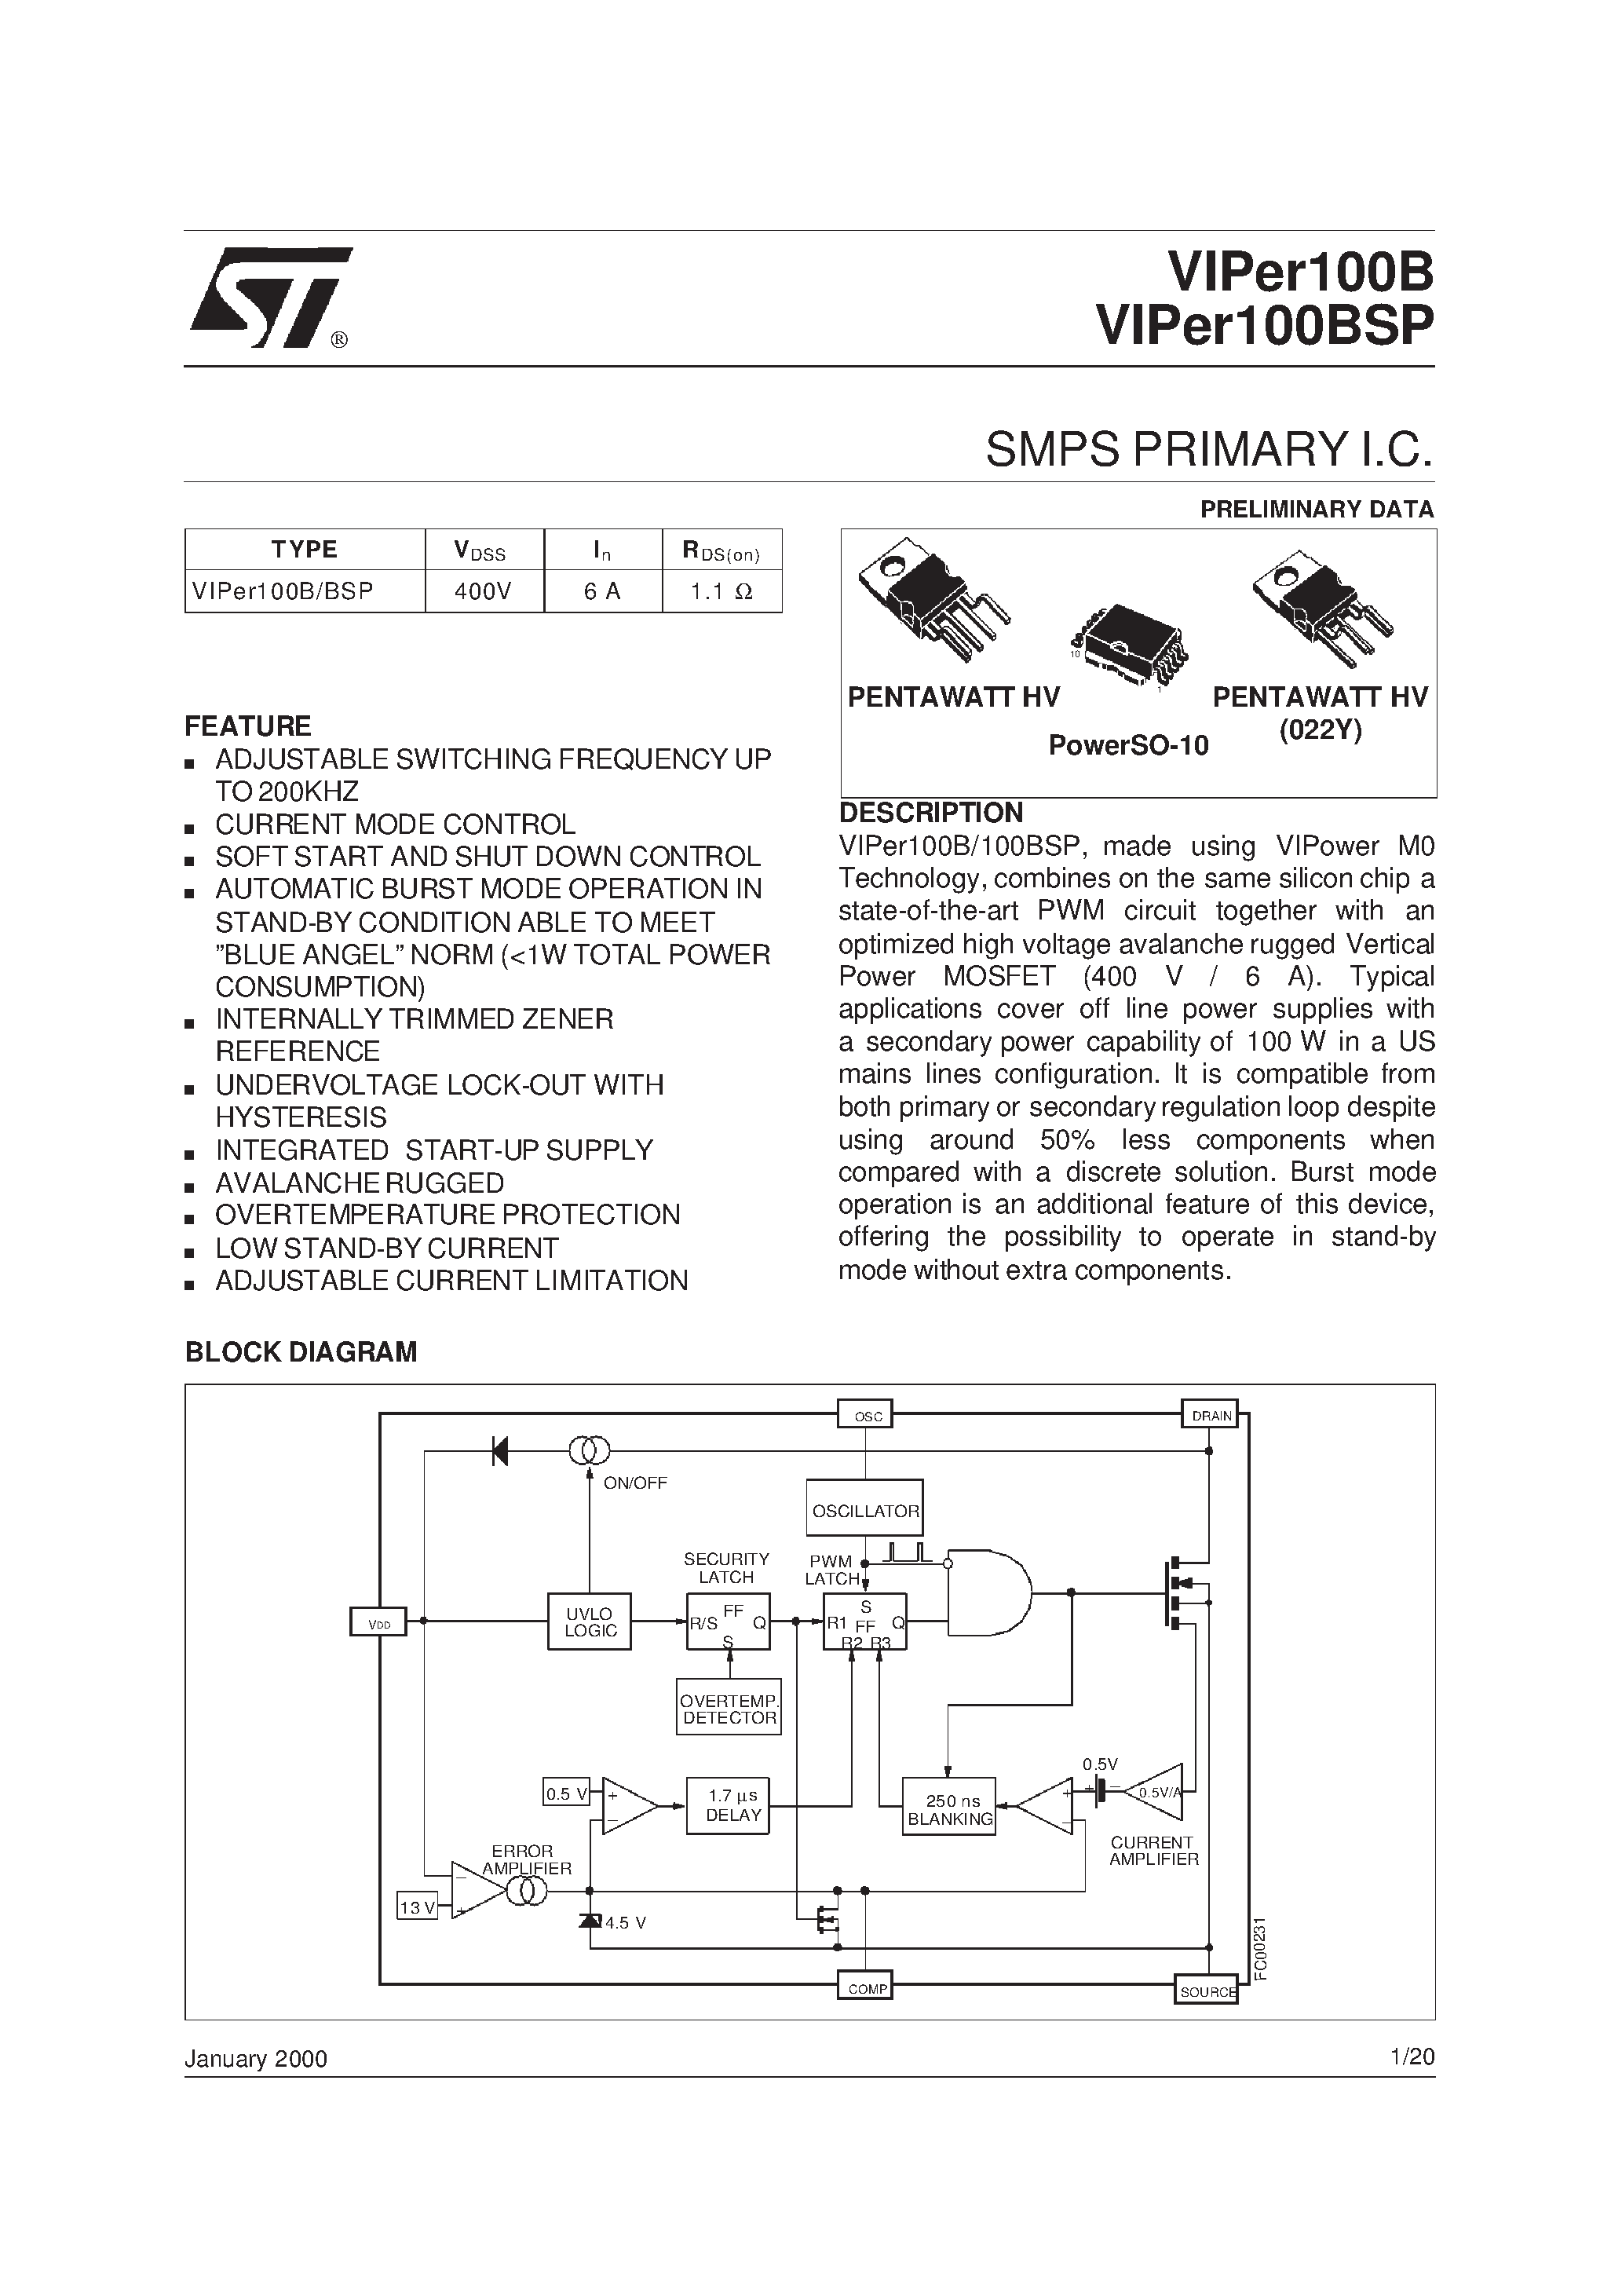 Datasheet VIPer100BSP - SMPS PRIMARY I.C. page 1